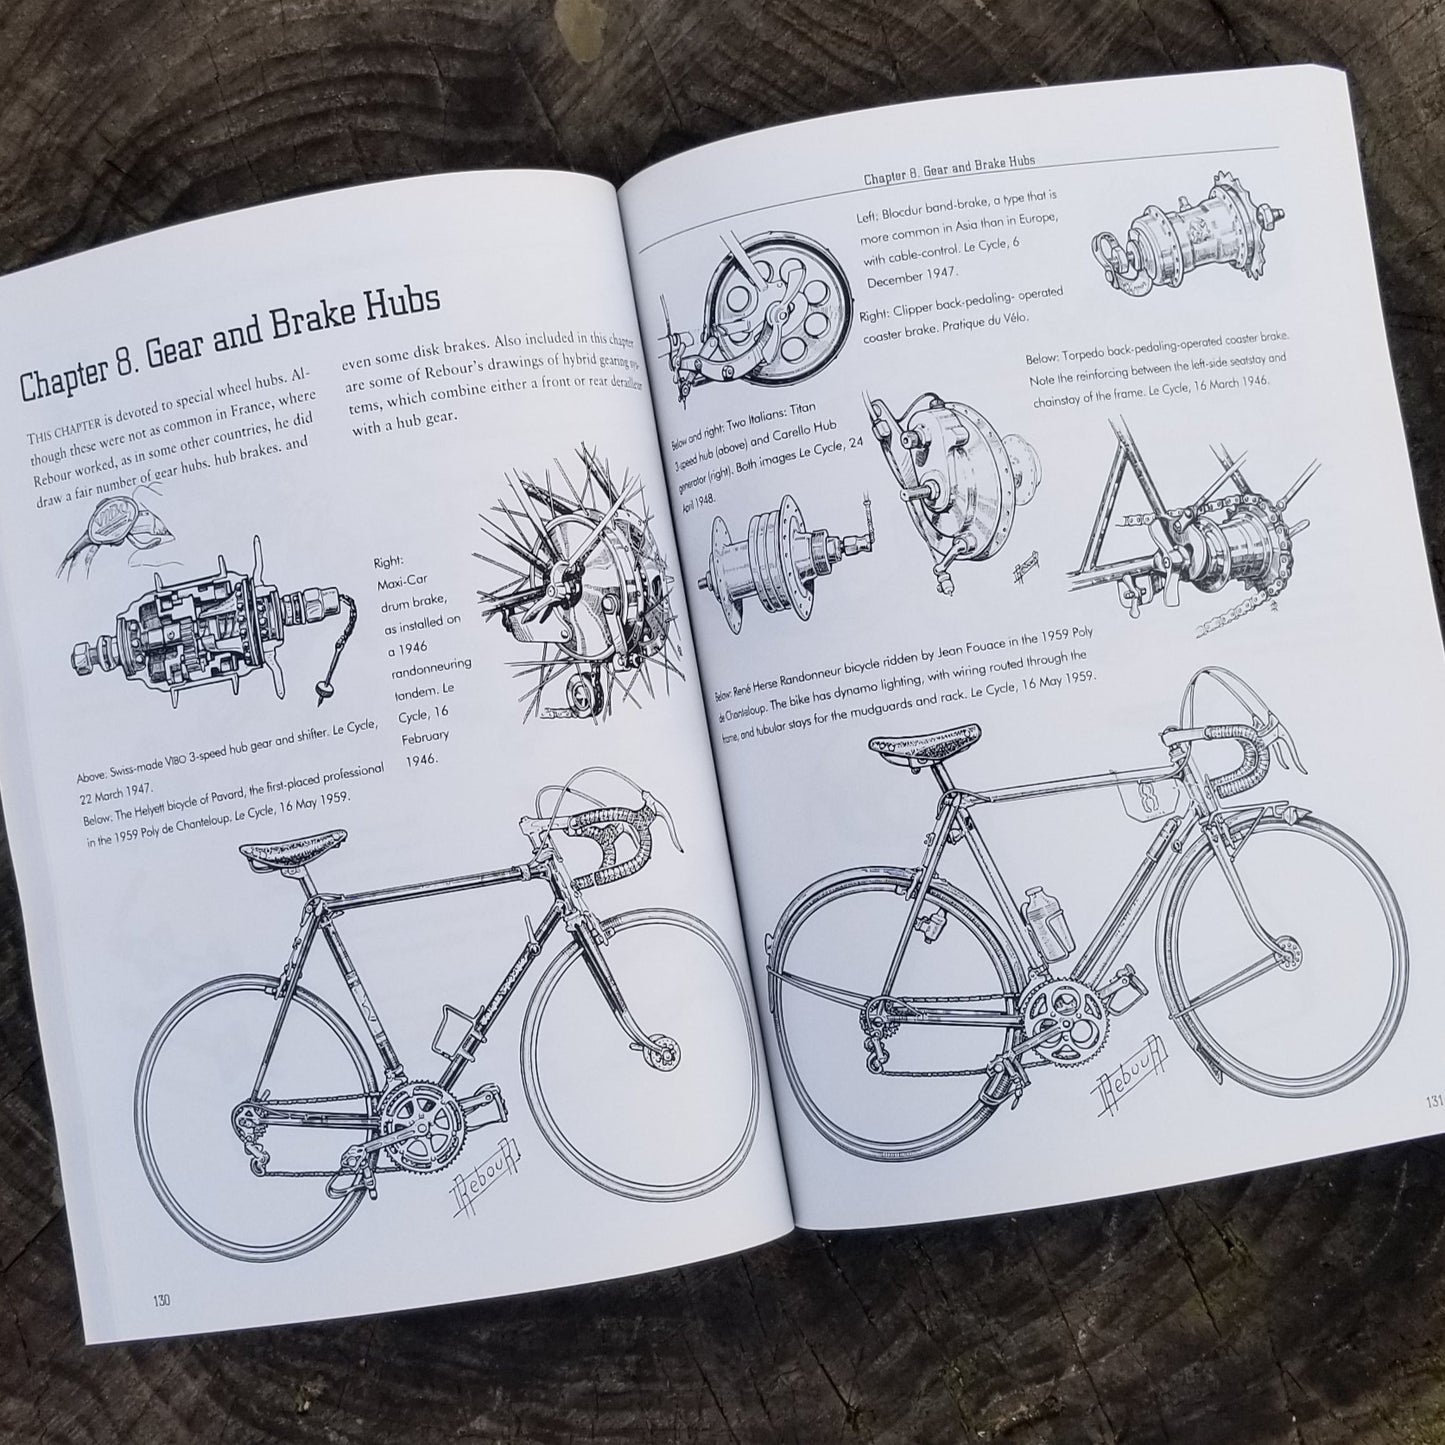 Book - The Bicycle Illustrations of Daniel Rebour